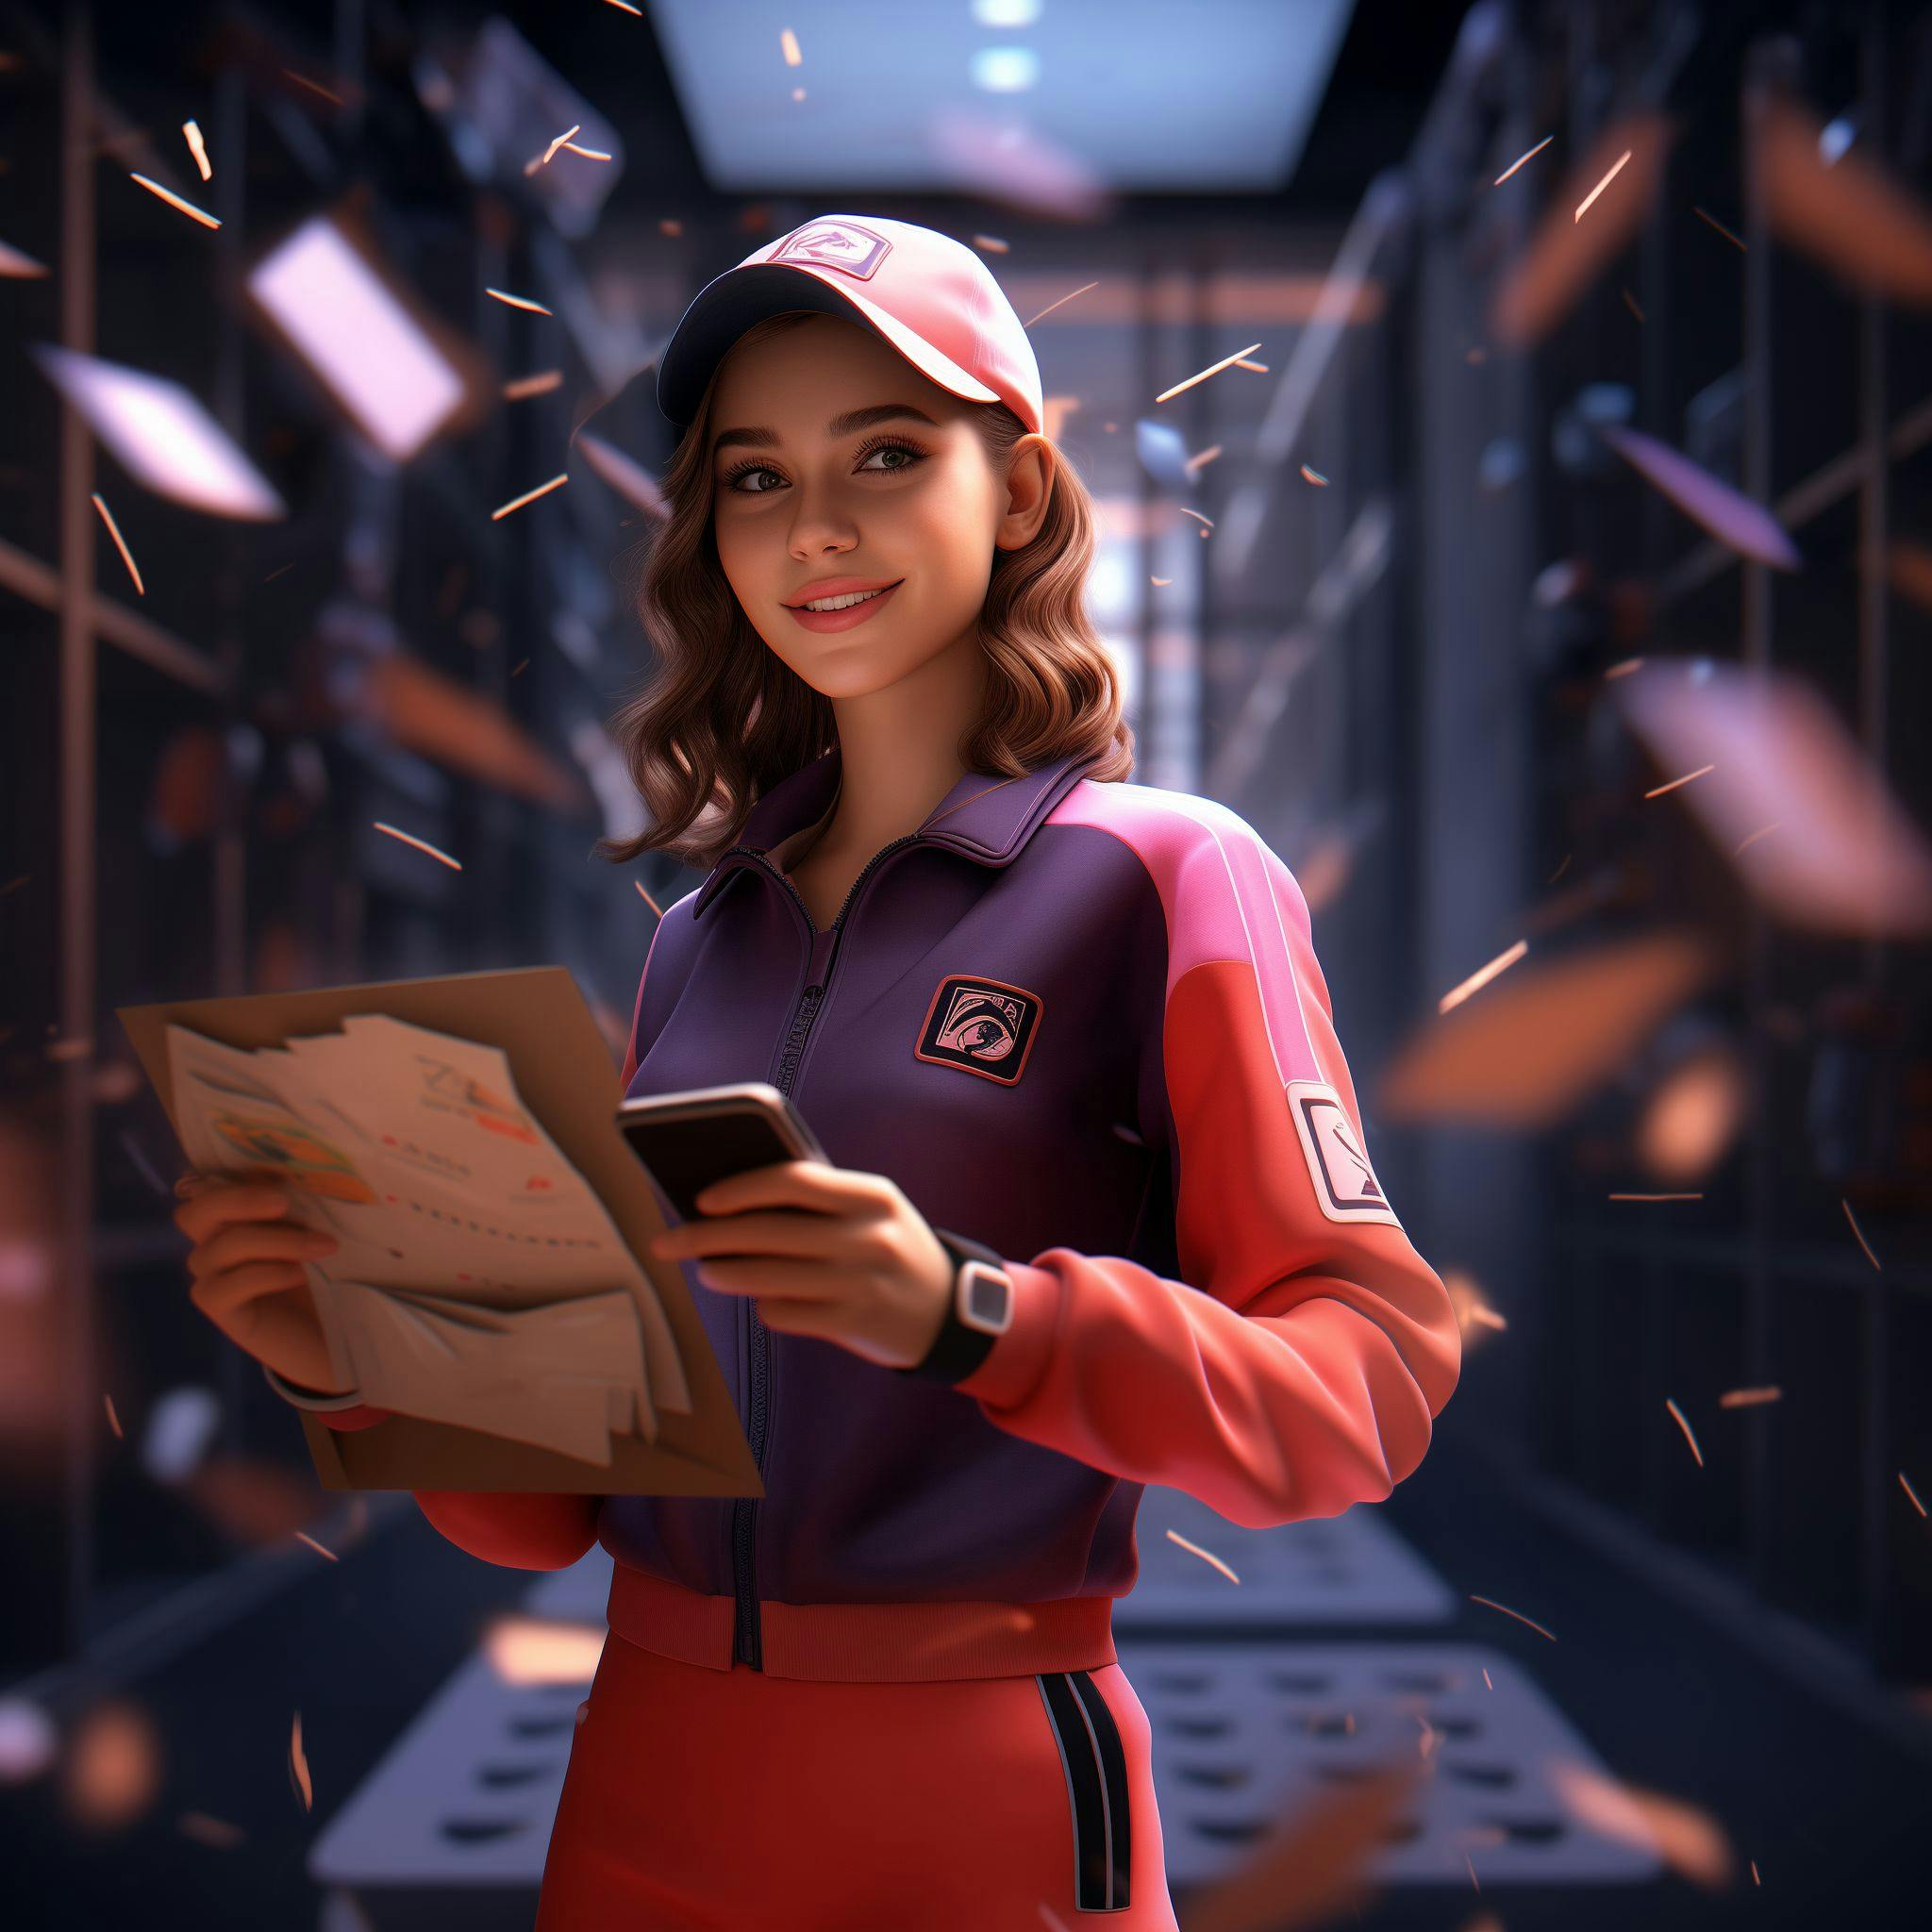 Image of a female postal worker ready to track parcels. With background.